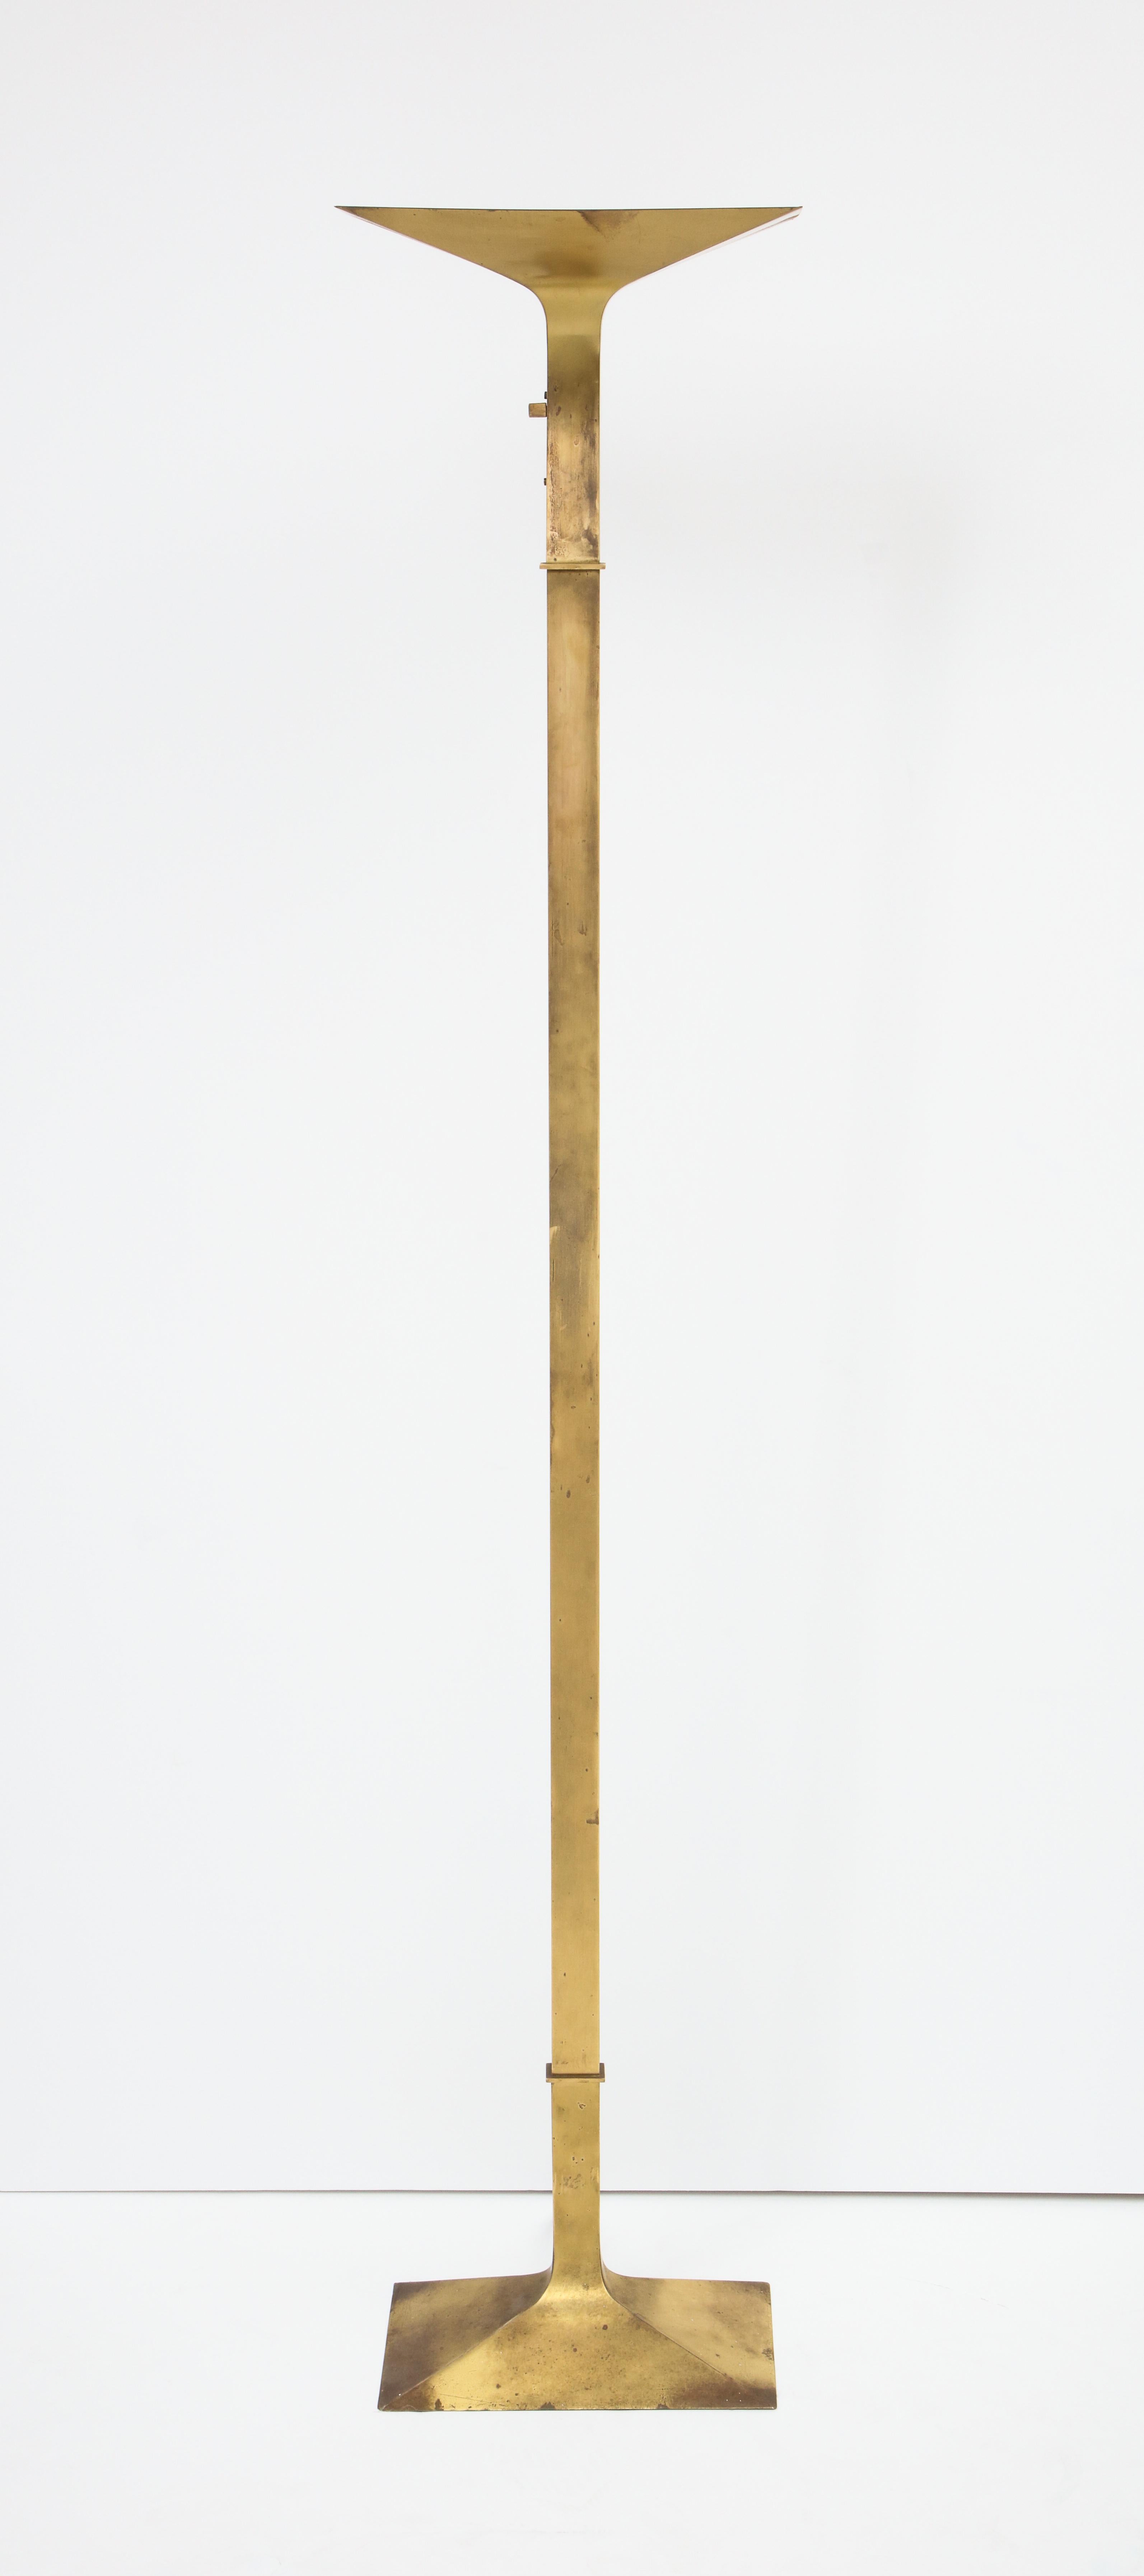 symmetrical patinated brass halogen floor lamp
Italy.
In the style of Romeo Rega.